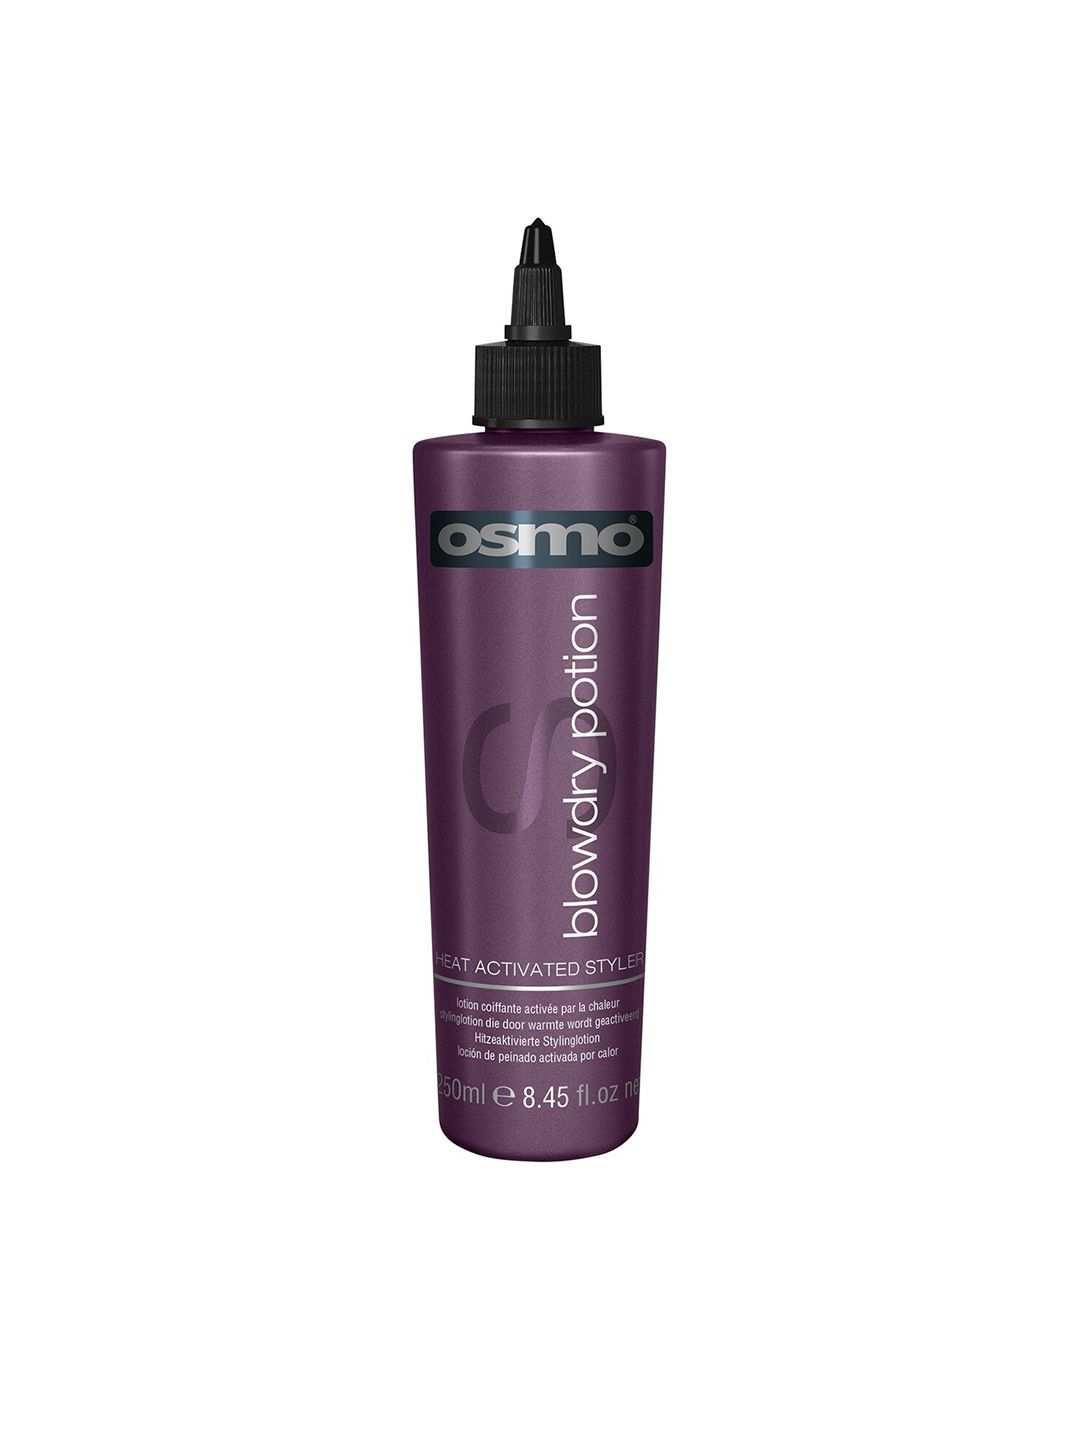 osmo Blowdry Potion Hair Gel 250 ml Price in India